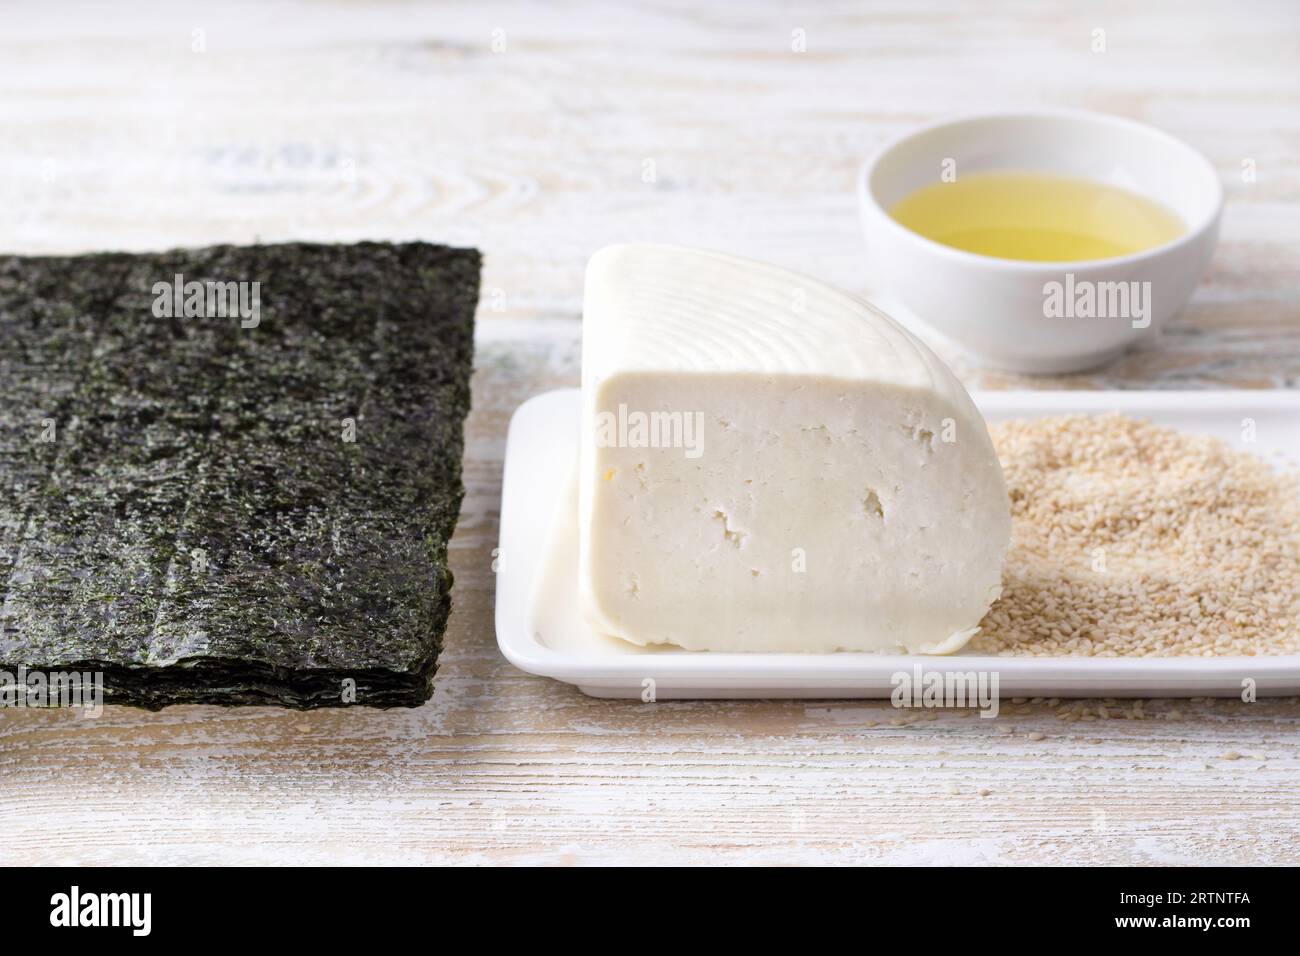 Fresh cheese, nori, sesame seeds and vegetable oil - ingredients for preparing a delicious vegetarian dish. Stock Photo